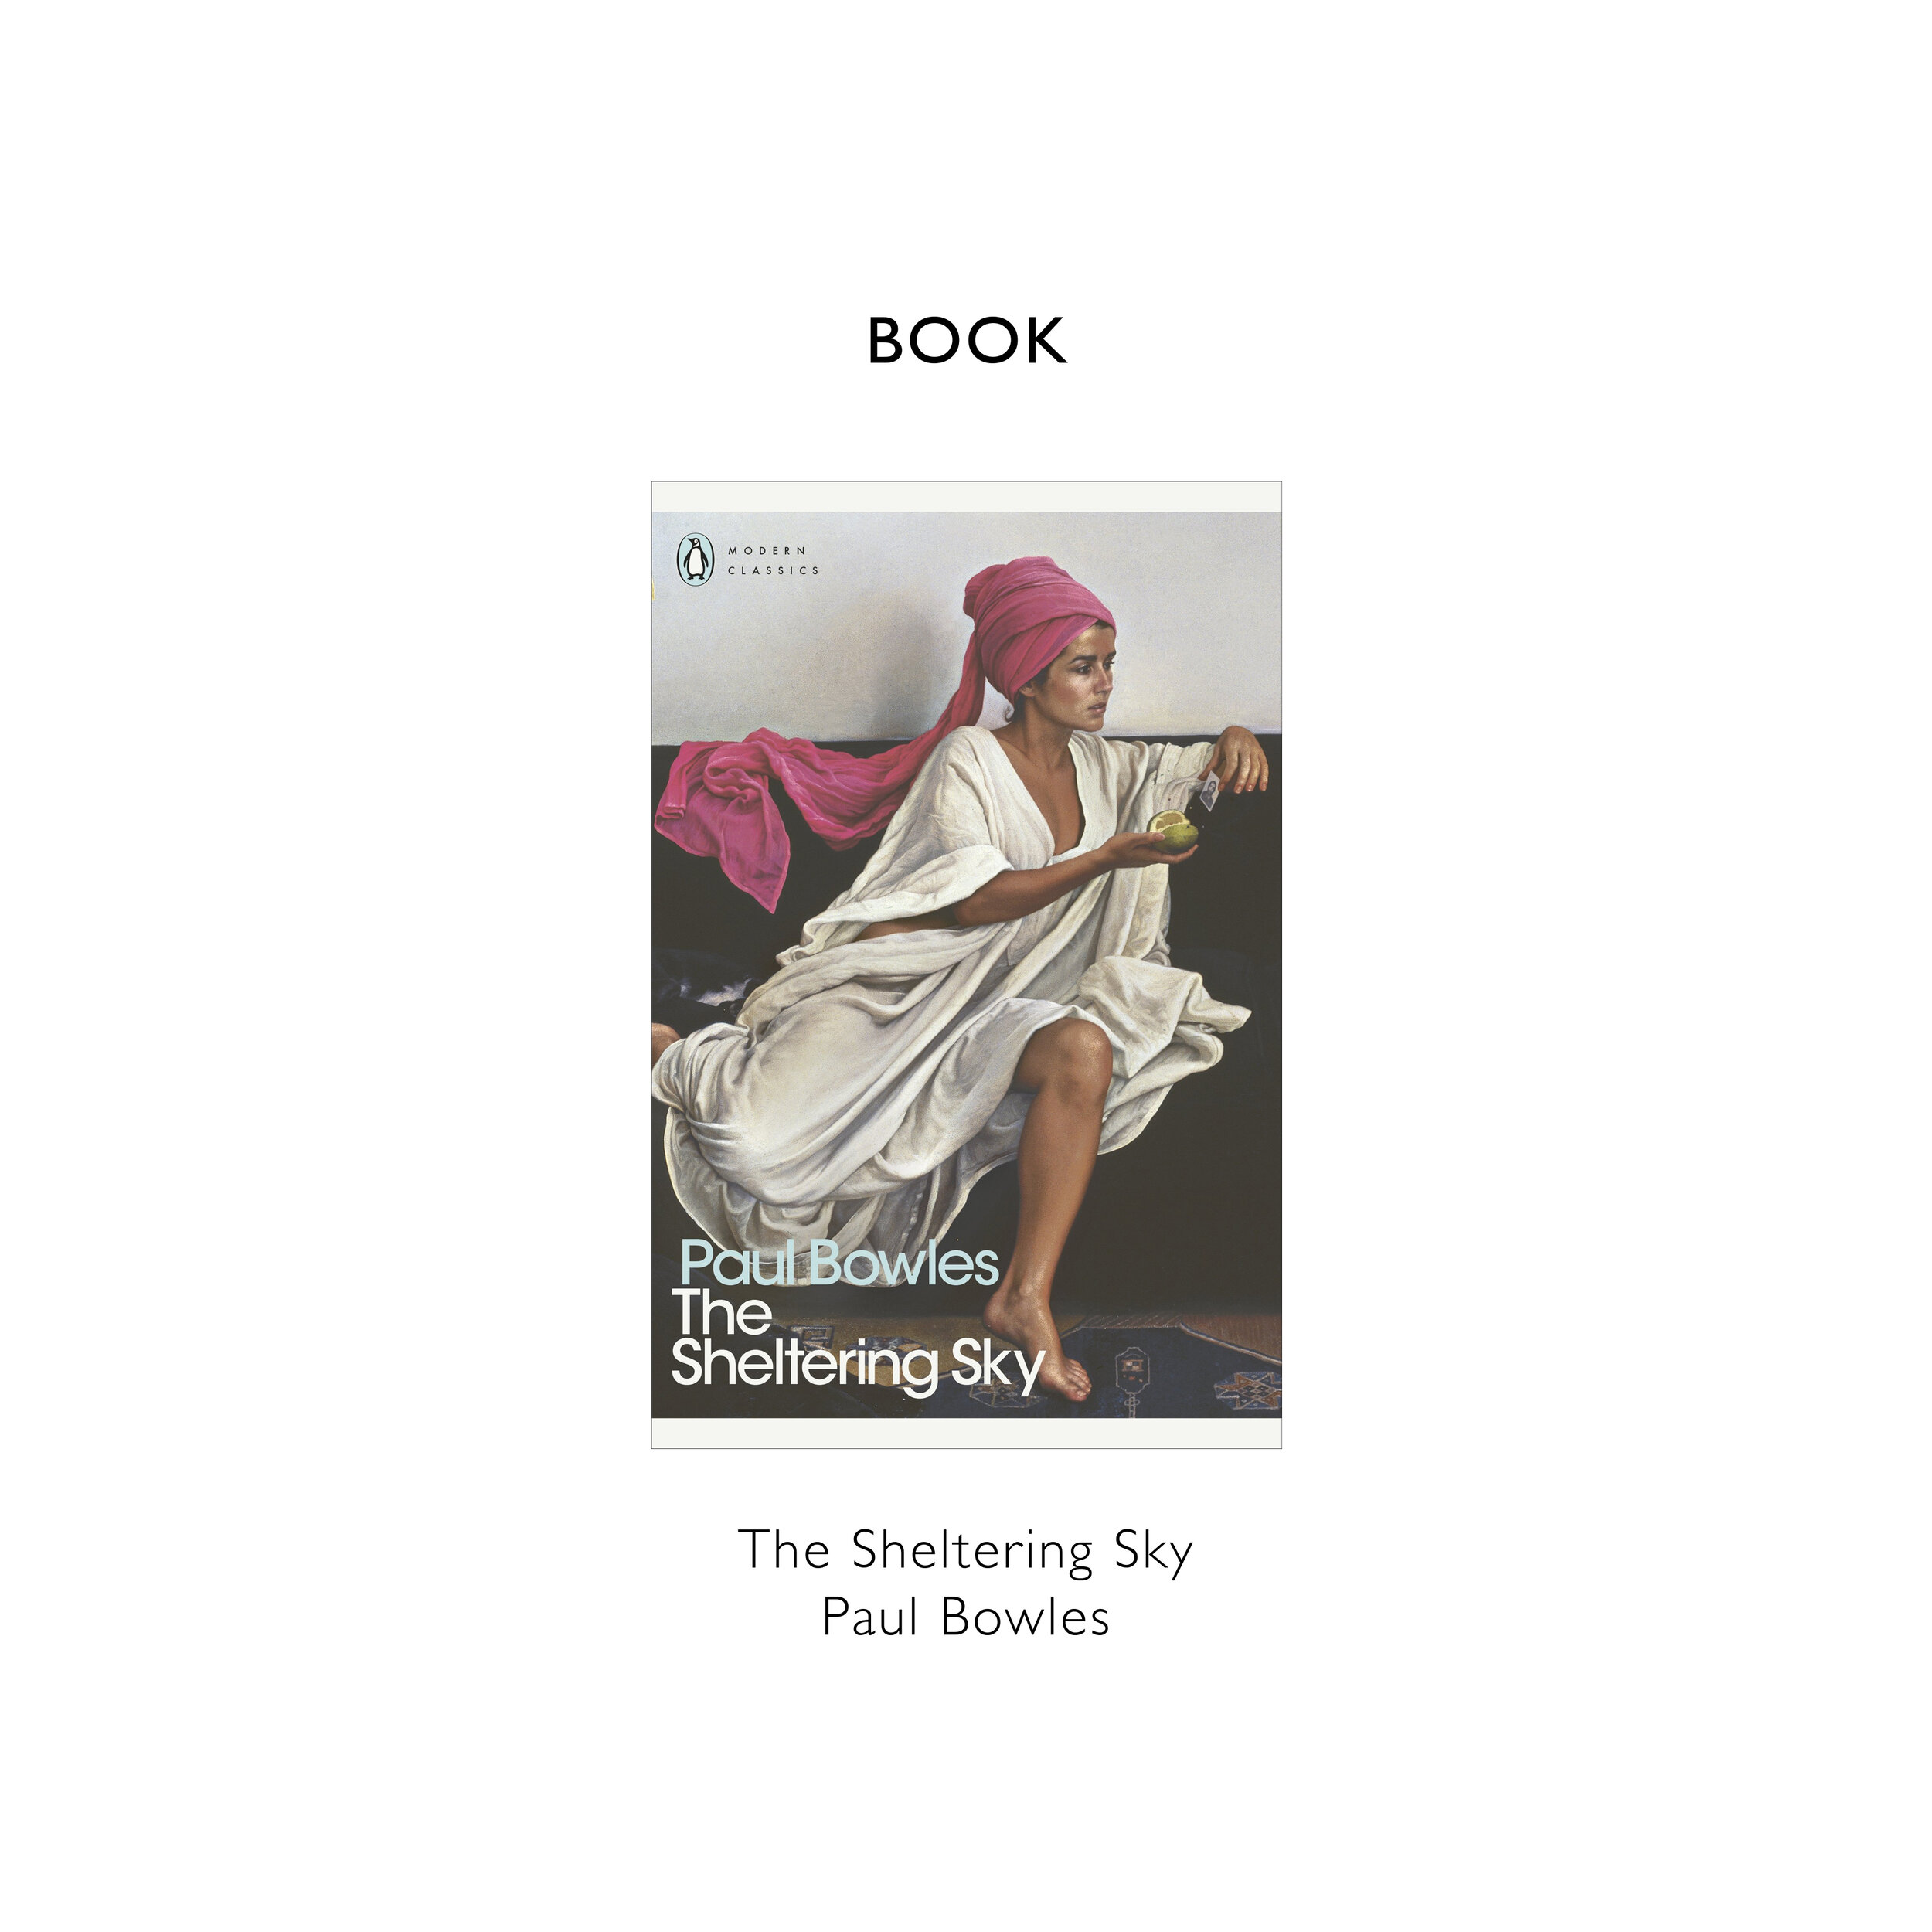 REFERENCE BLOG TEMPLATE The Sheltering Sky  Paul Bowles  copy.jpg